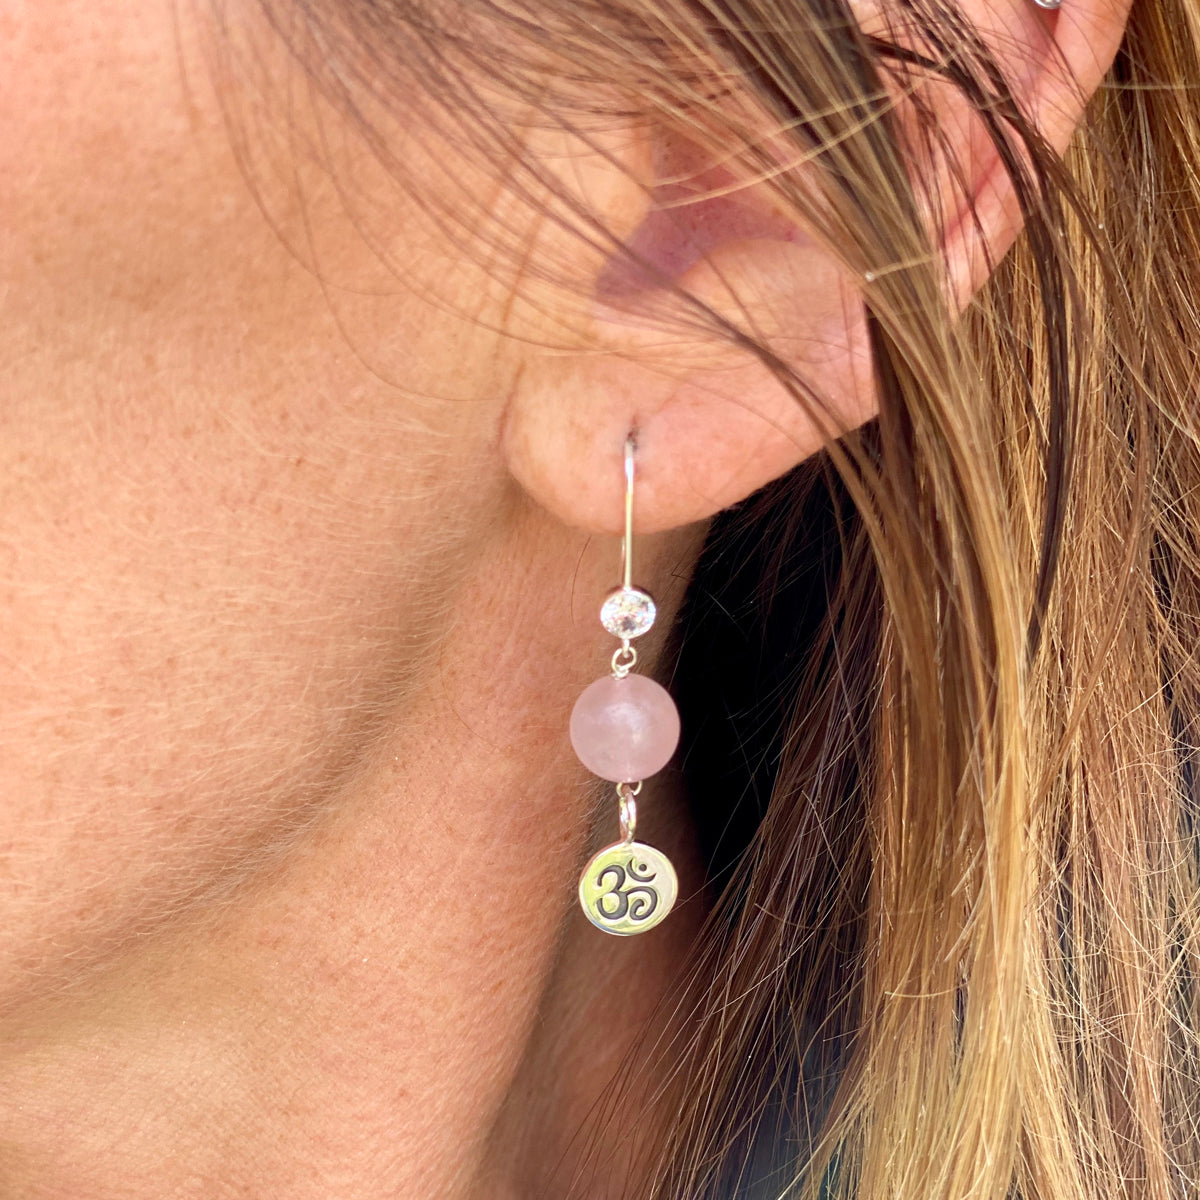 Sterling Silver Yoga Inspired Ohm Jewelry Set with Rose Quartz to Hear the Sound of the Universe